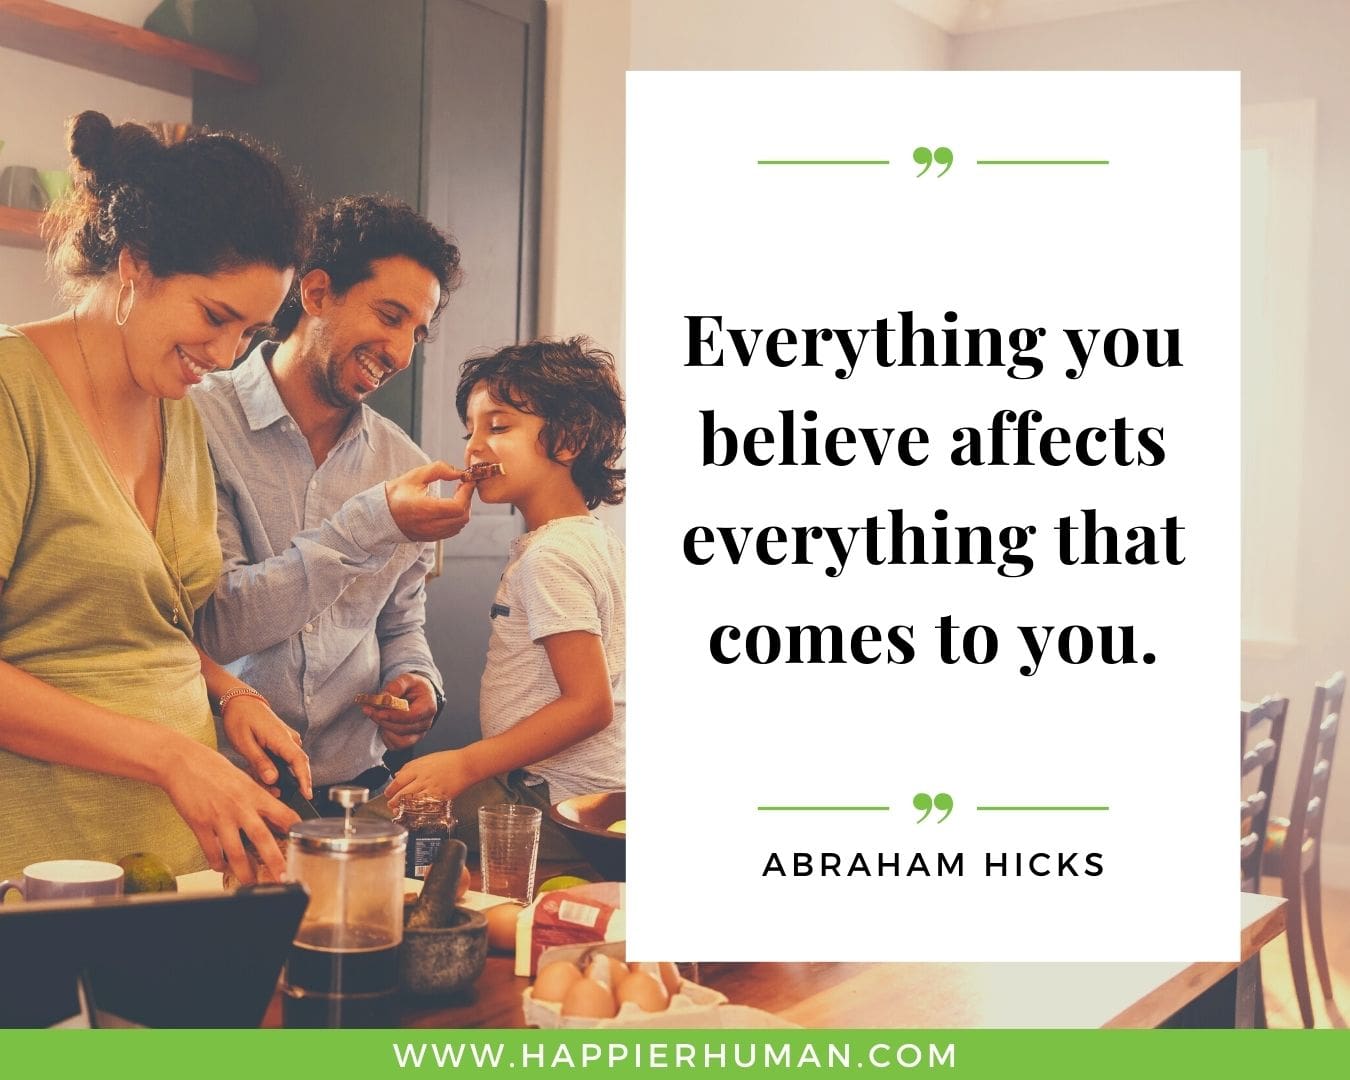 Positive Energy Quotes - “Everything you believe affects everything that comes to you.” - Abraham Hicks